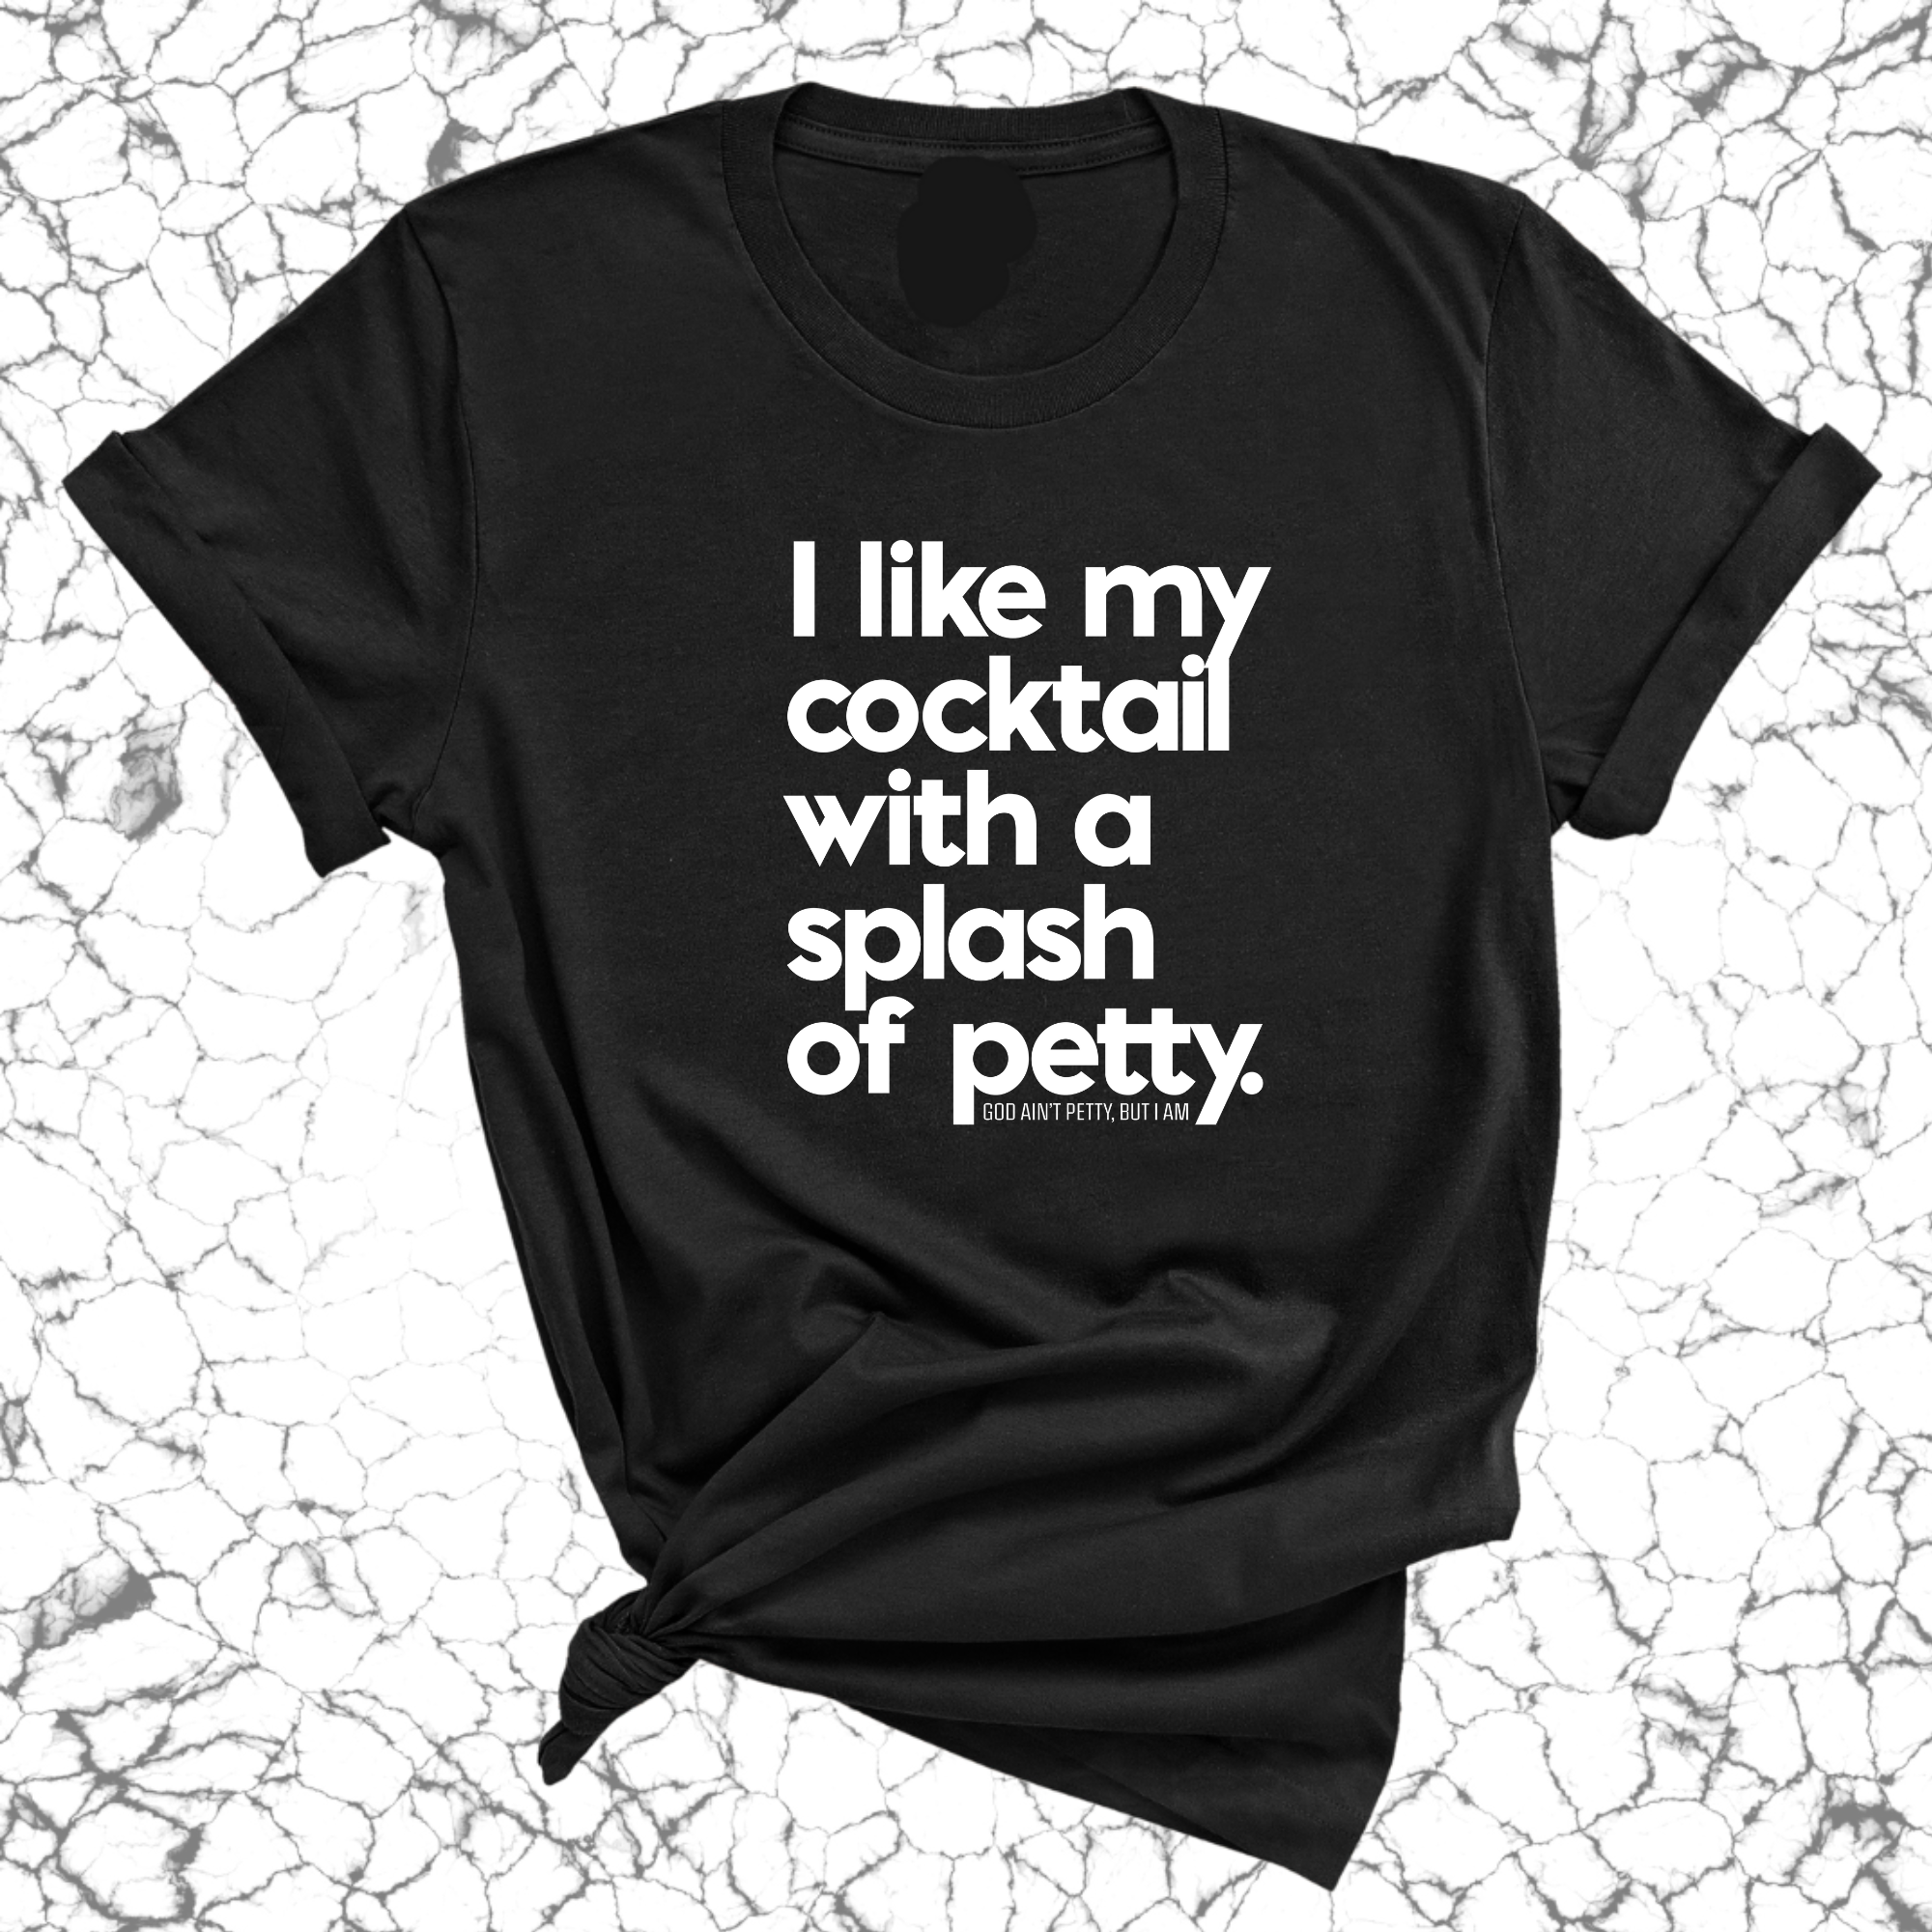 I like my cocktail with a splash of petty Unisex Tee-T-Shirt-The Original God Ain't Petty But I Am